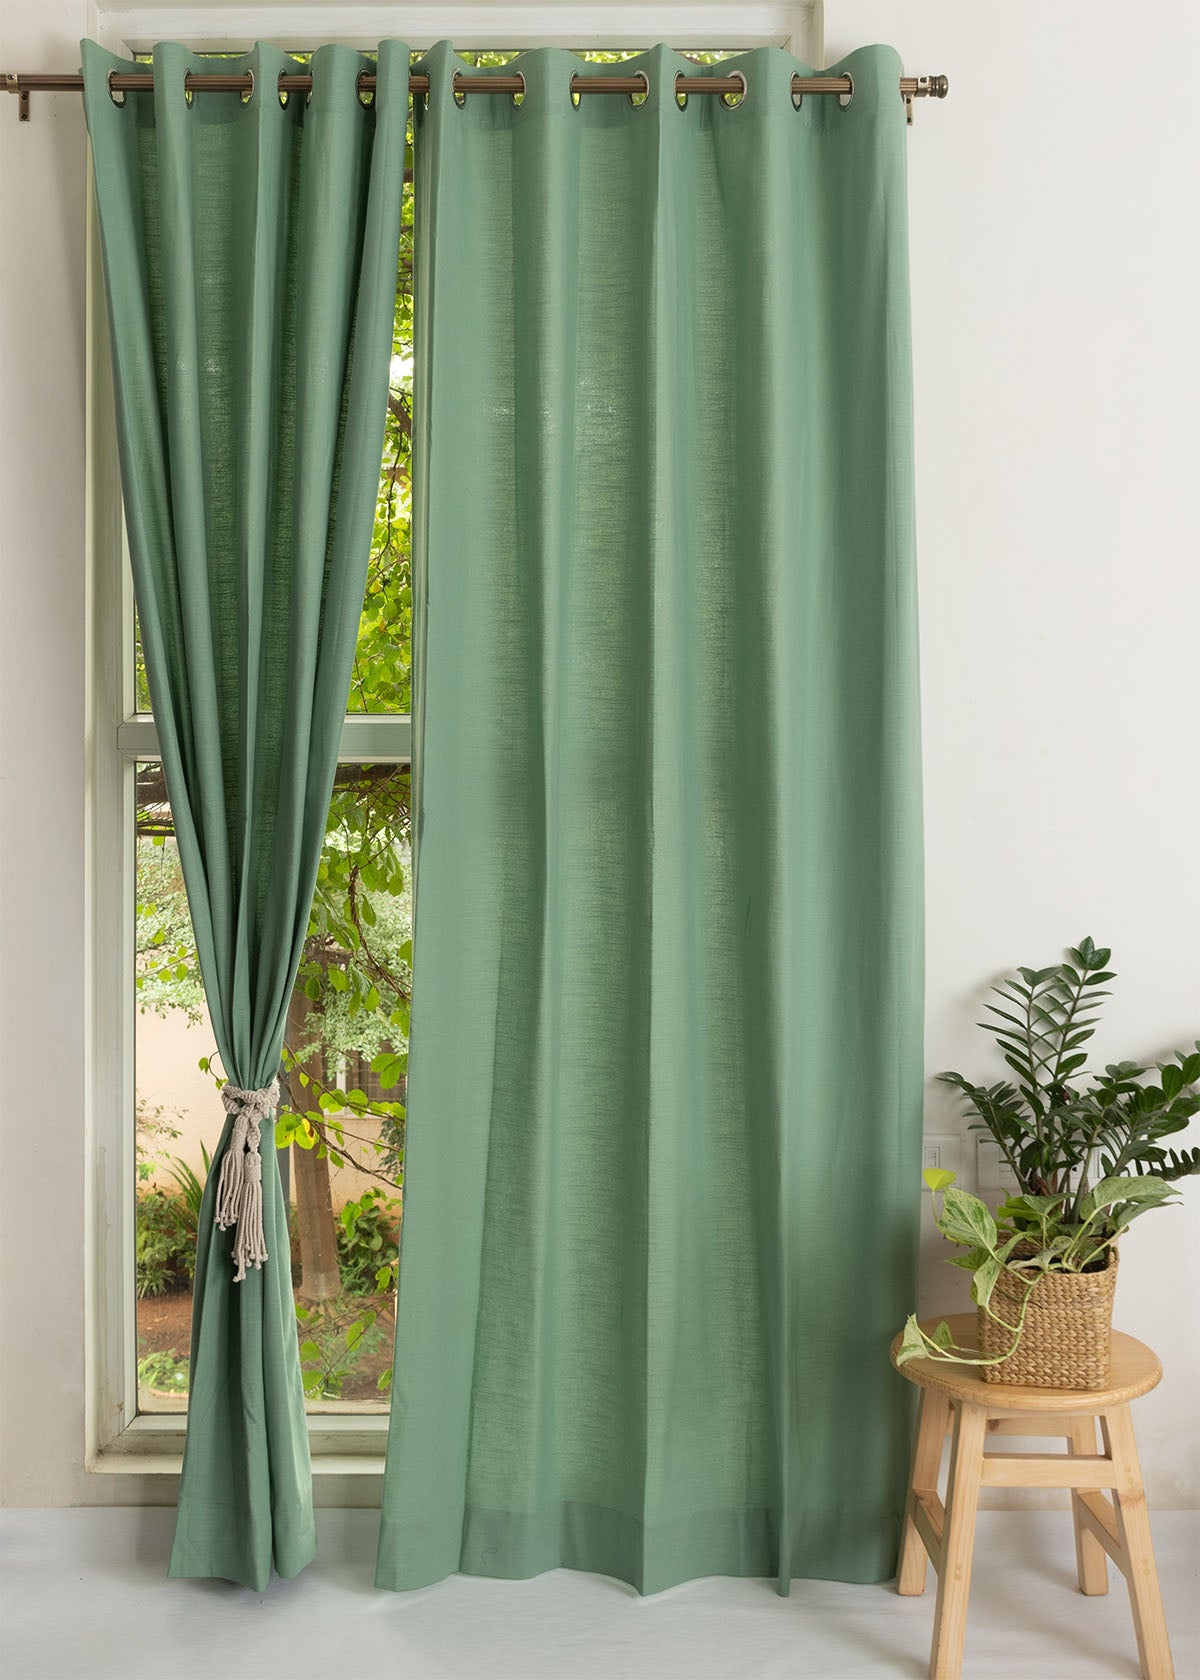 Solid Sage green 100% Customizable Cotton plain curtain for bedroom - Room darkening